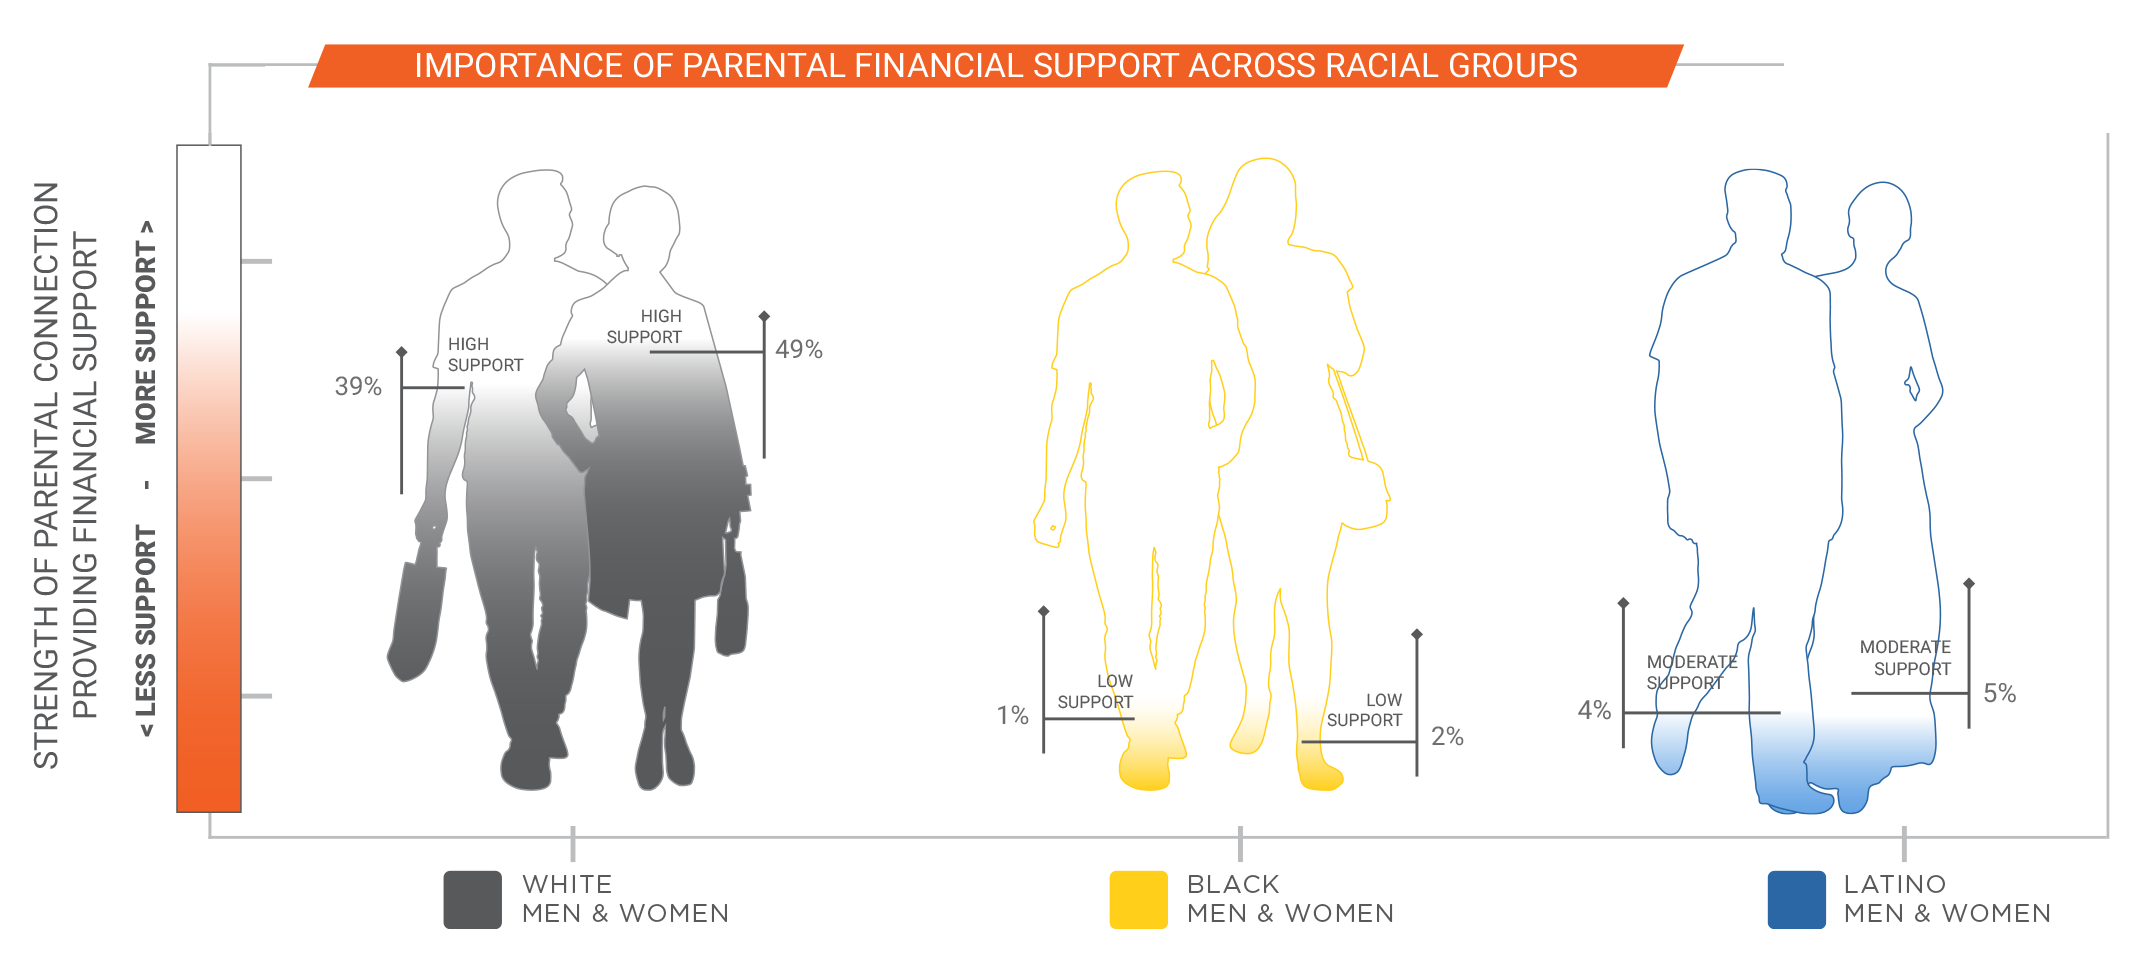 Importance of parental financial support across racial groups